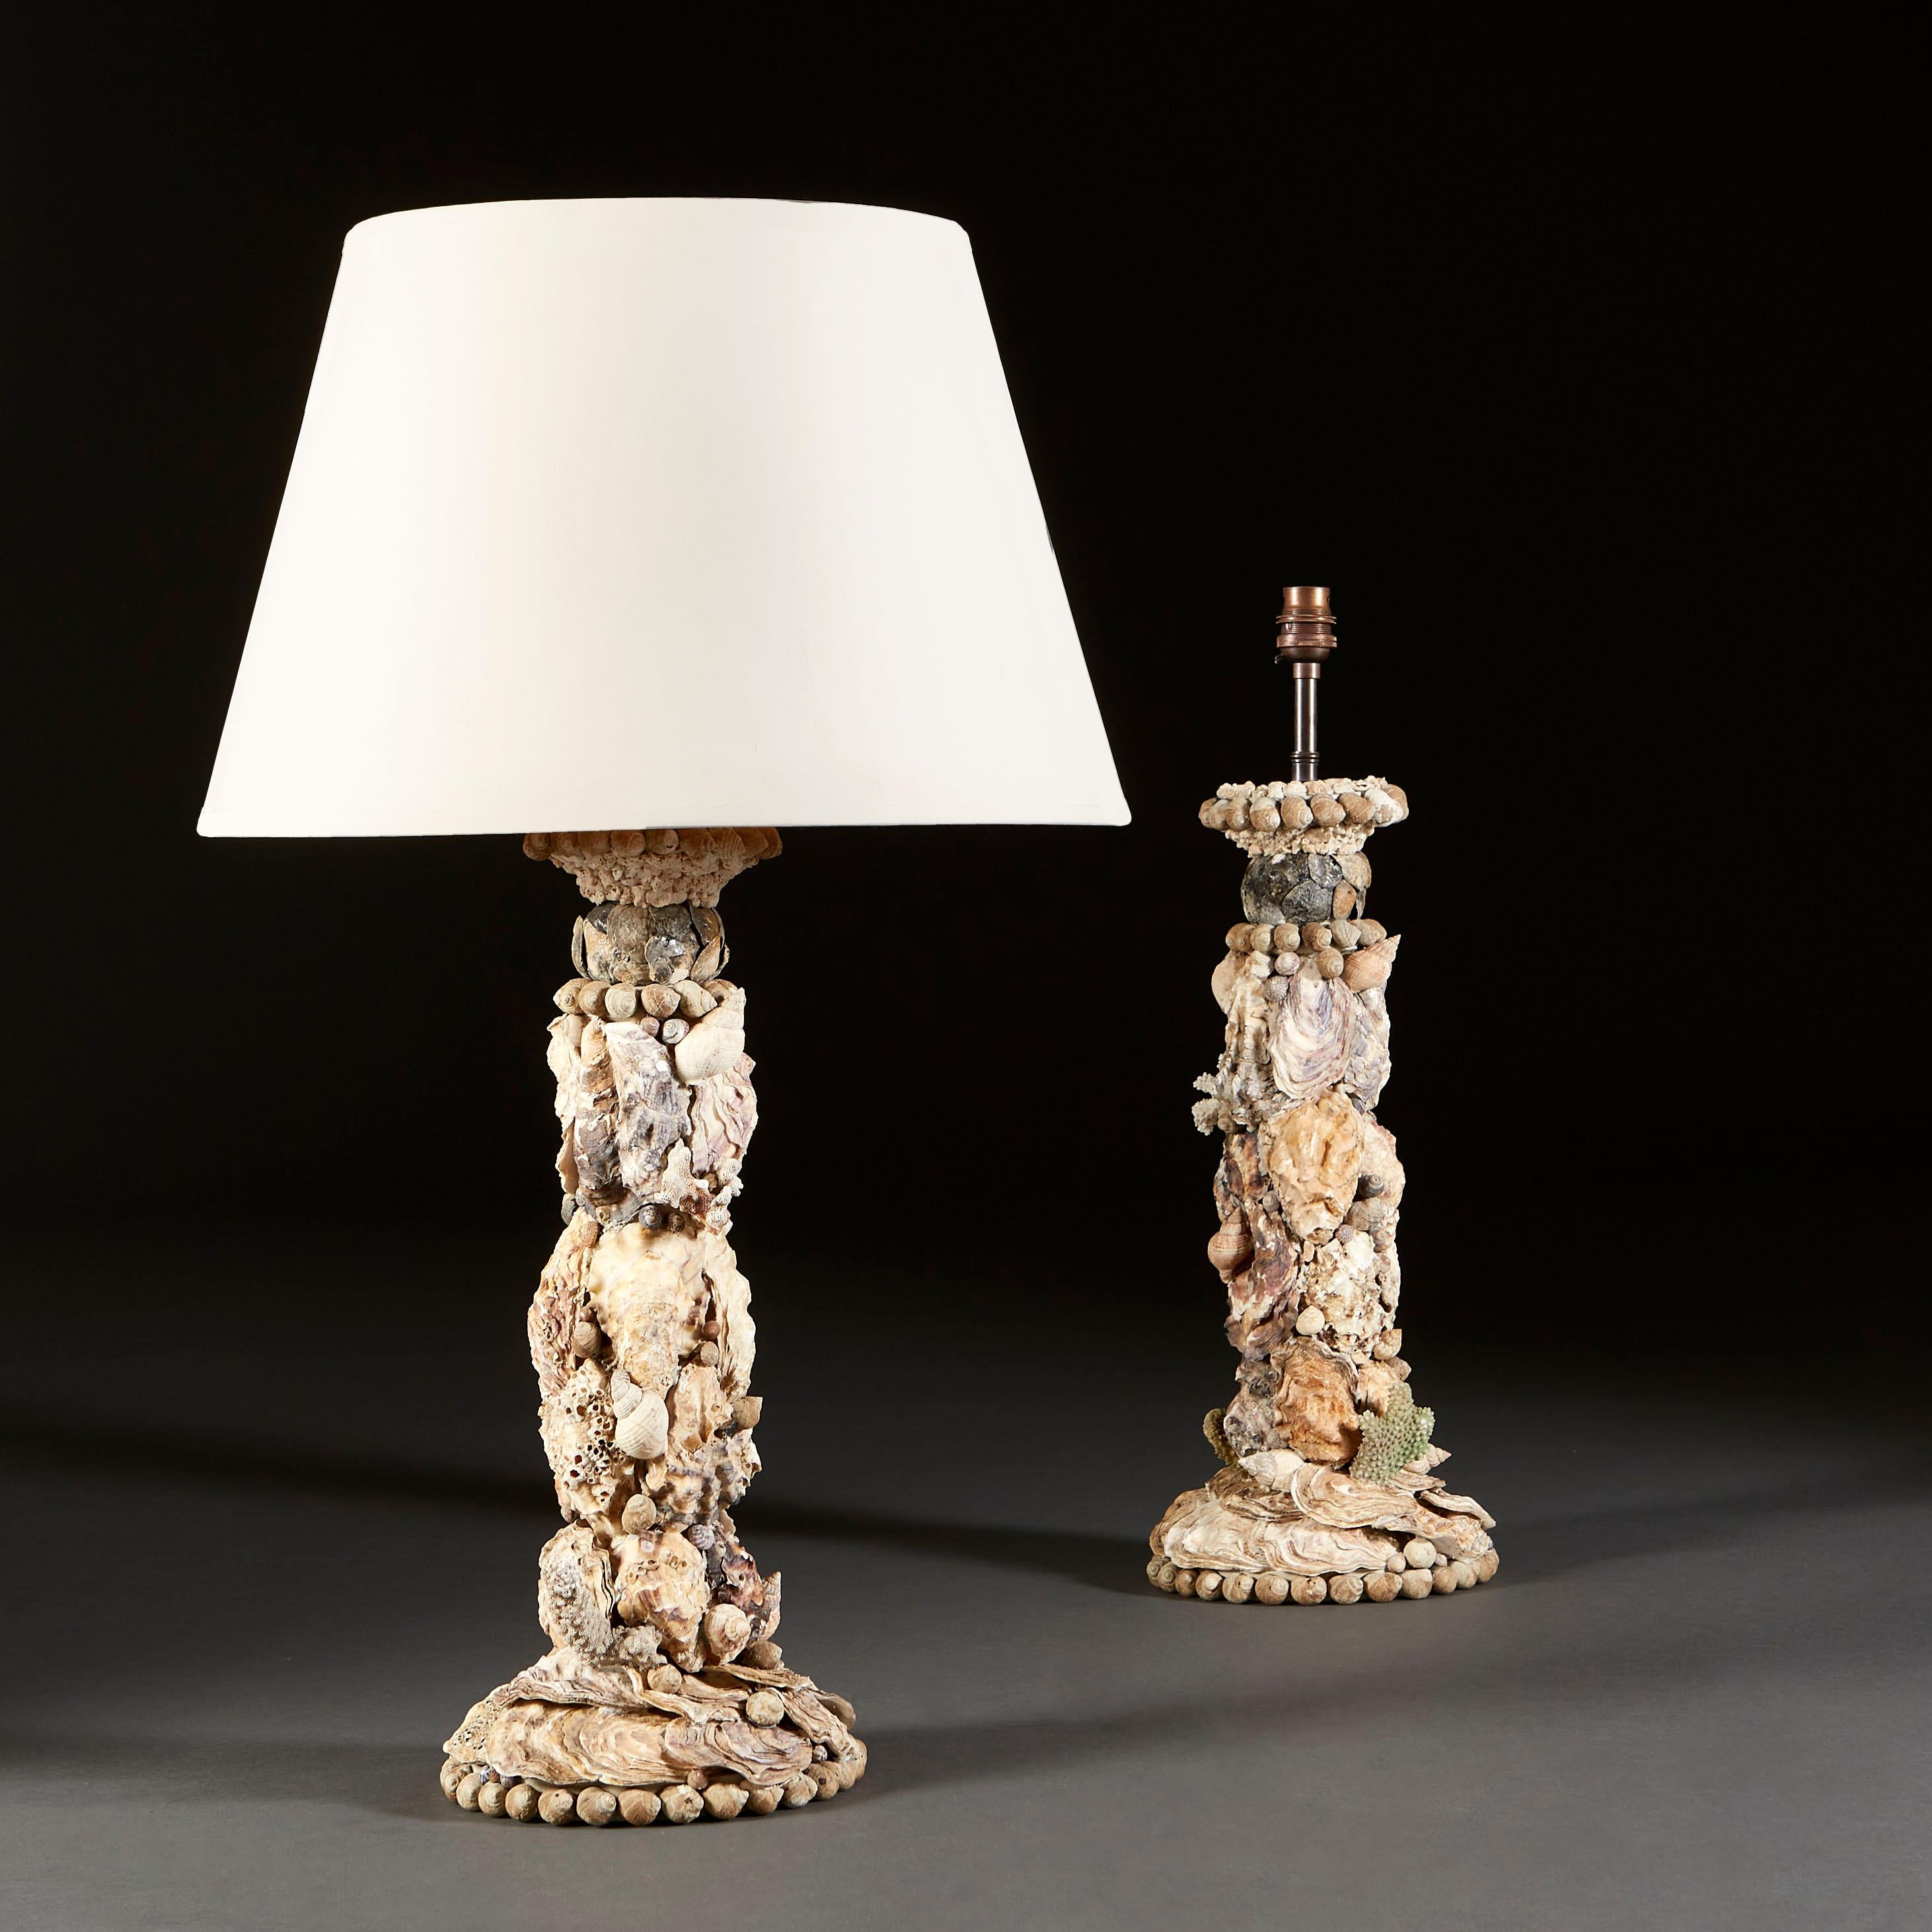 A pair of shell encrusted grotto lamps, incorporating oyster shells and conch shells, by Tess Morley.

Currently wired for the UK.

Please note: Lampshades not included.